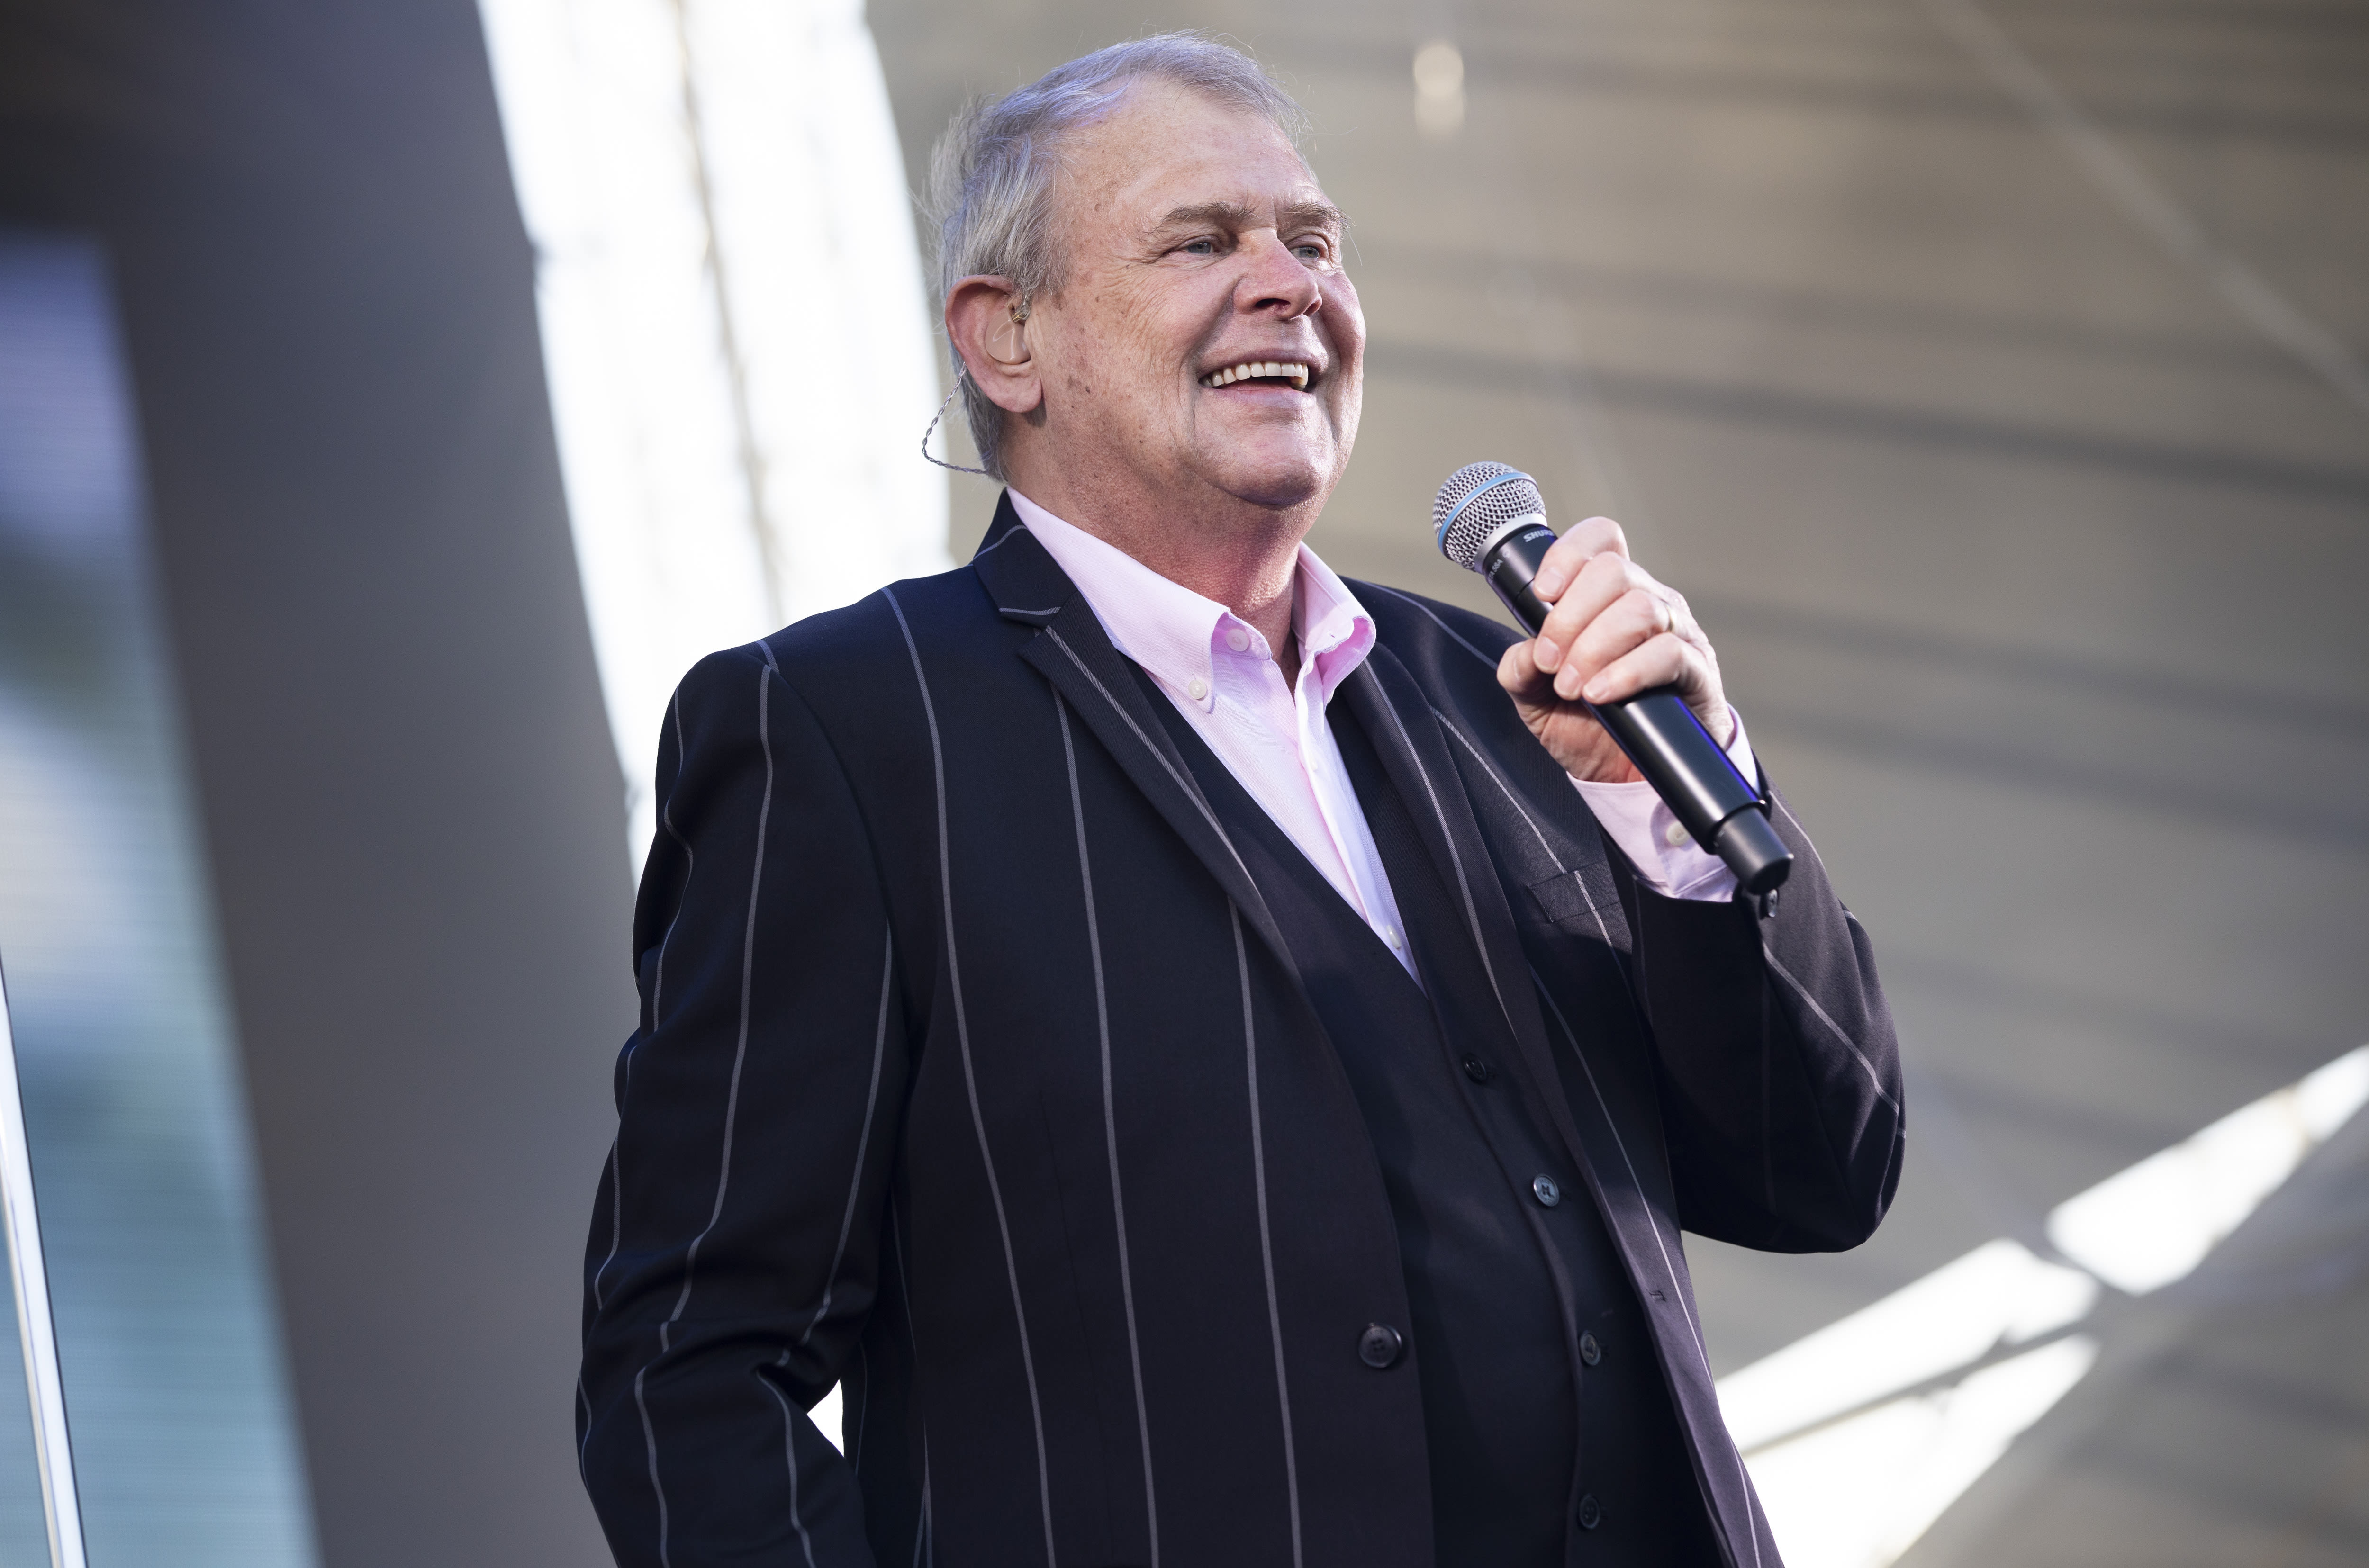 John Farnham’s ‘You’re The Voice’ Gains Attention in Kamala Harris Support Video